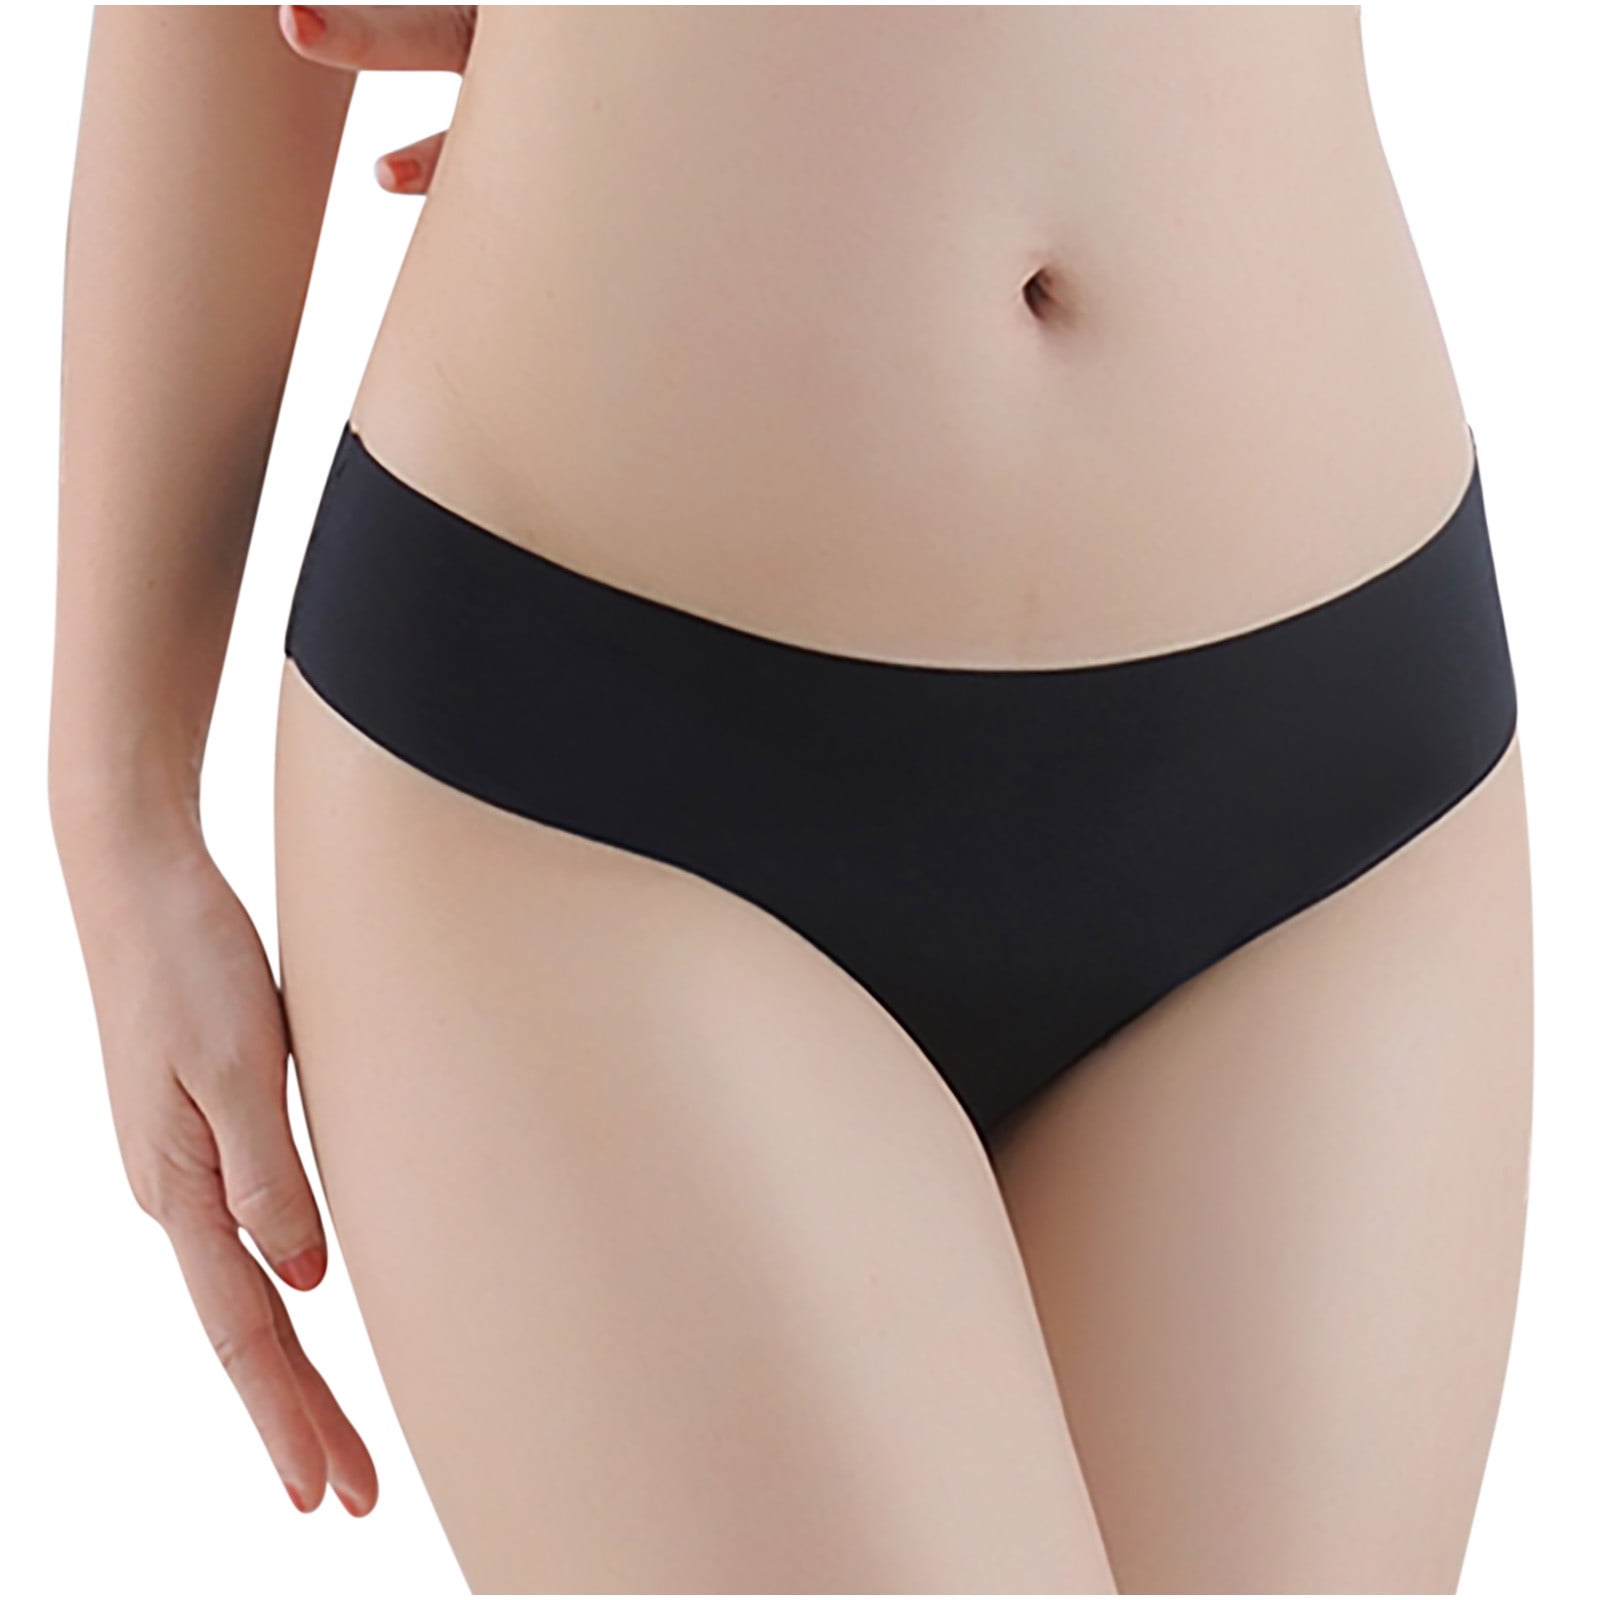 Lopecy-Sta Women's Sexy Lingerie Solid Color Seamless Briefs Panties Thong  Underwear Discount Clearance Womens Underwear Period Underwear for Women  Black 